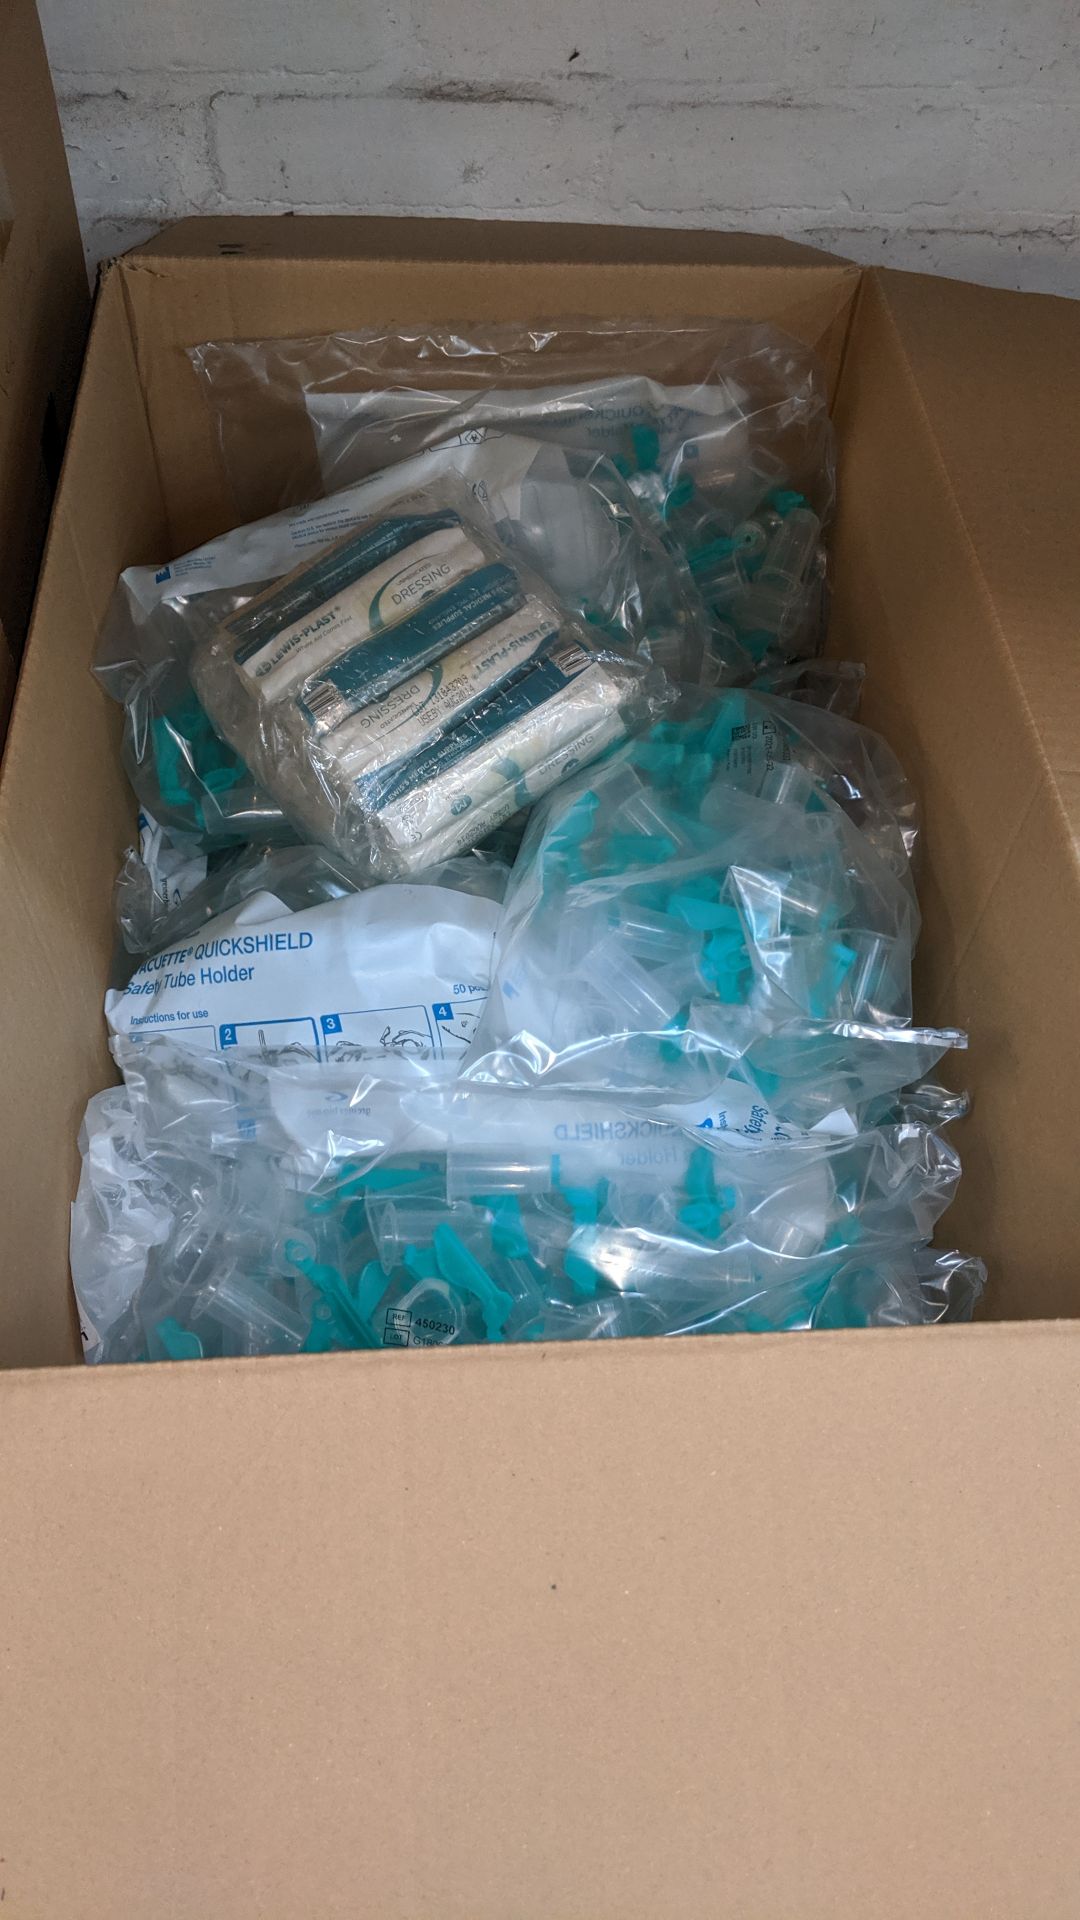 Contents of a bay of medical supplies including safety tube holders, syringes, storage cases & - Image 5 of 13